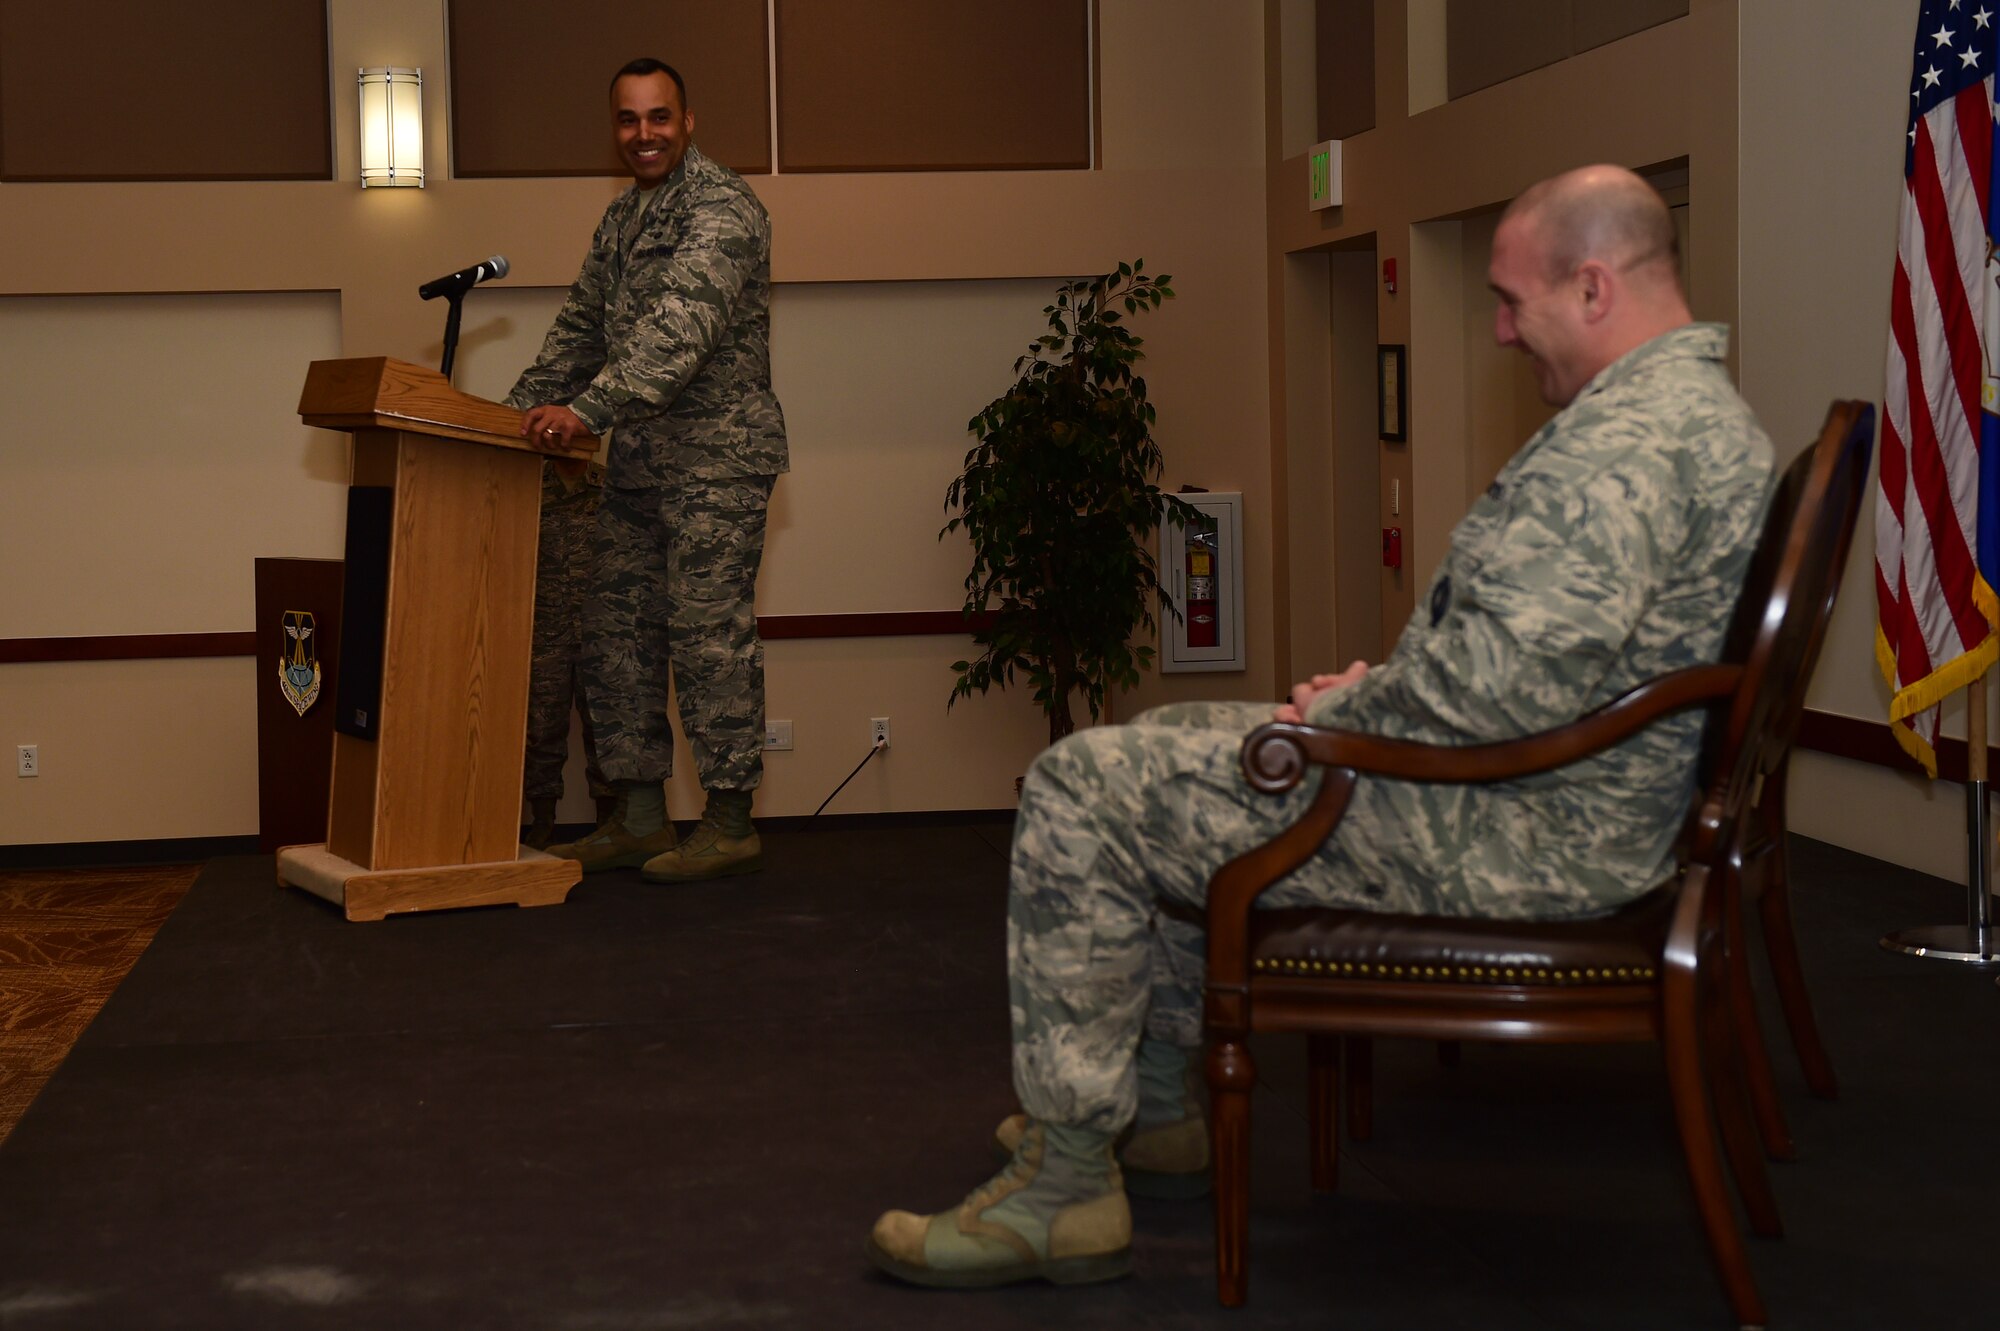 Col. Lorenzo Bradley, 460th Operations Group commander, speaks during the 460th OG Detachment 1 deactivation ceremony Jan. 11, 2017, at the Leadership Development Center on Buckley Air Force Base, Colo. The mission of Det. 1 focused on interim operations for Space Based Infared System Geosynchronous satellites until Block 10 delivered the consolidated ground system. (U.S. Air Force photo by Airman 1st Class Gabrielle Spradling/Released)